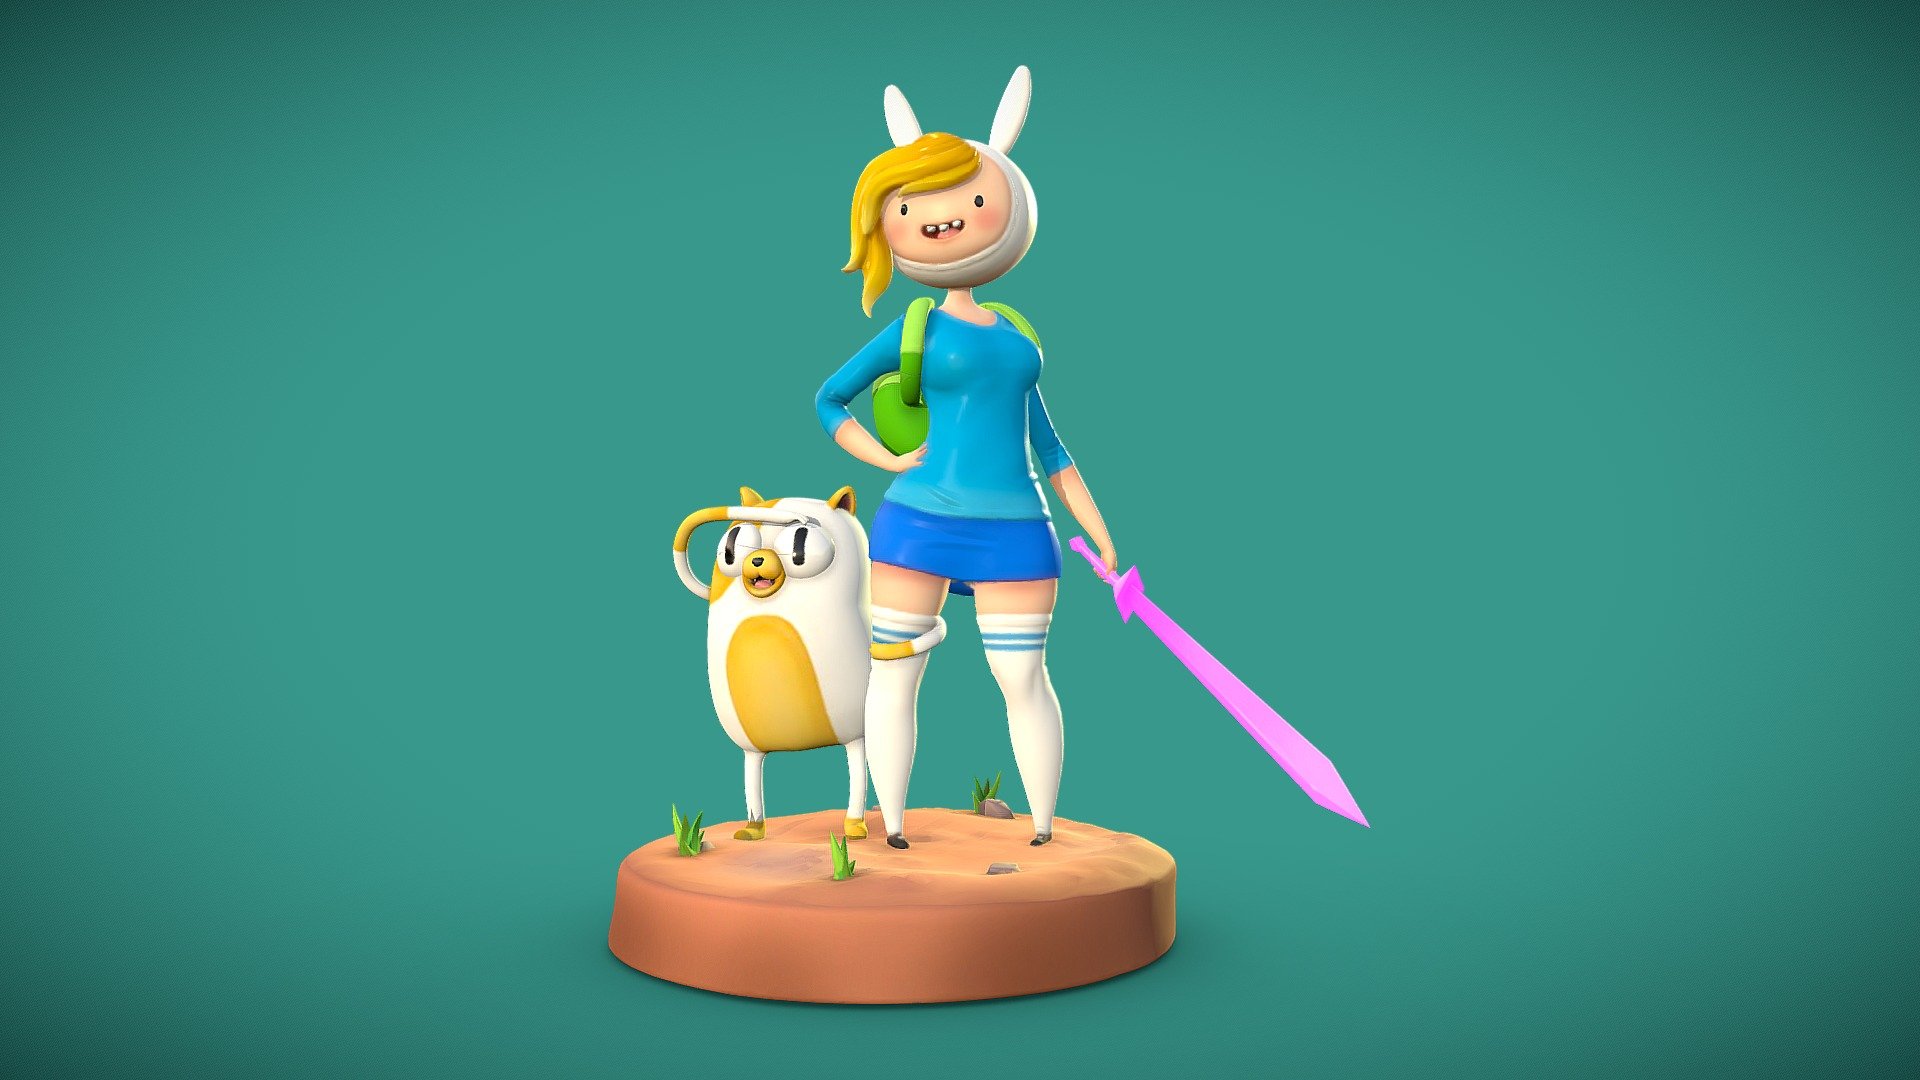 fionna and cake anime wallpaper